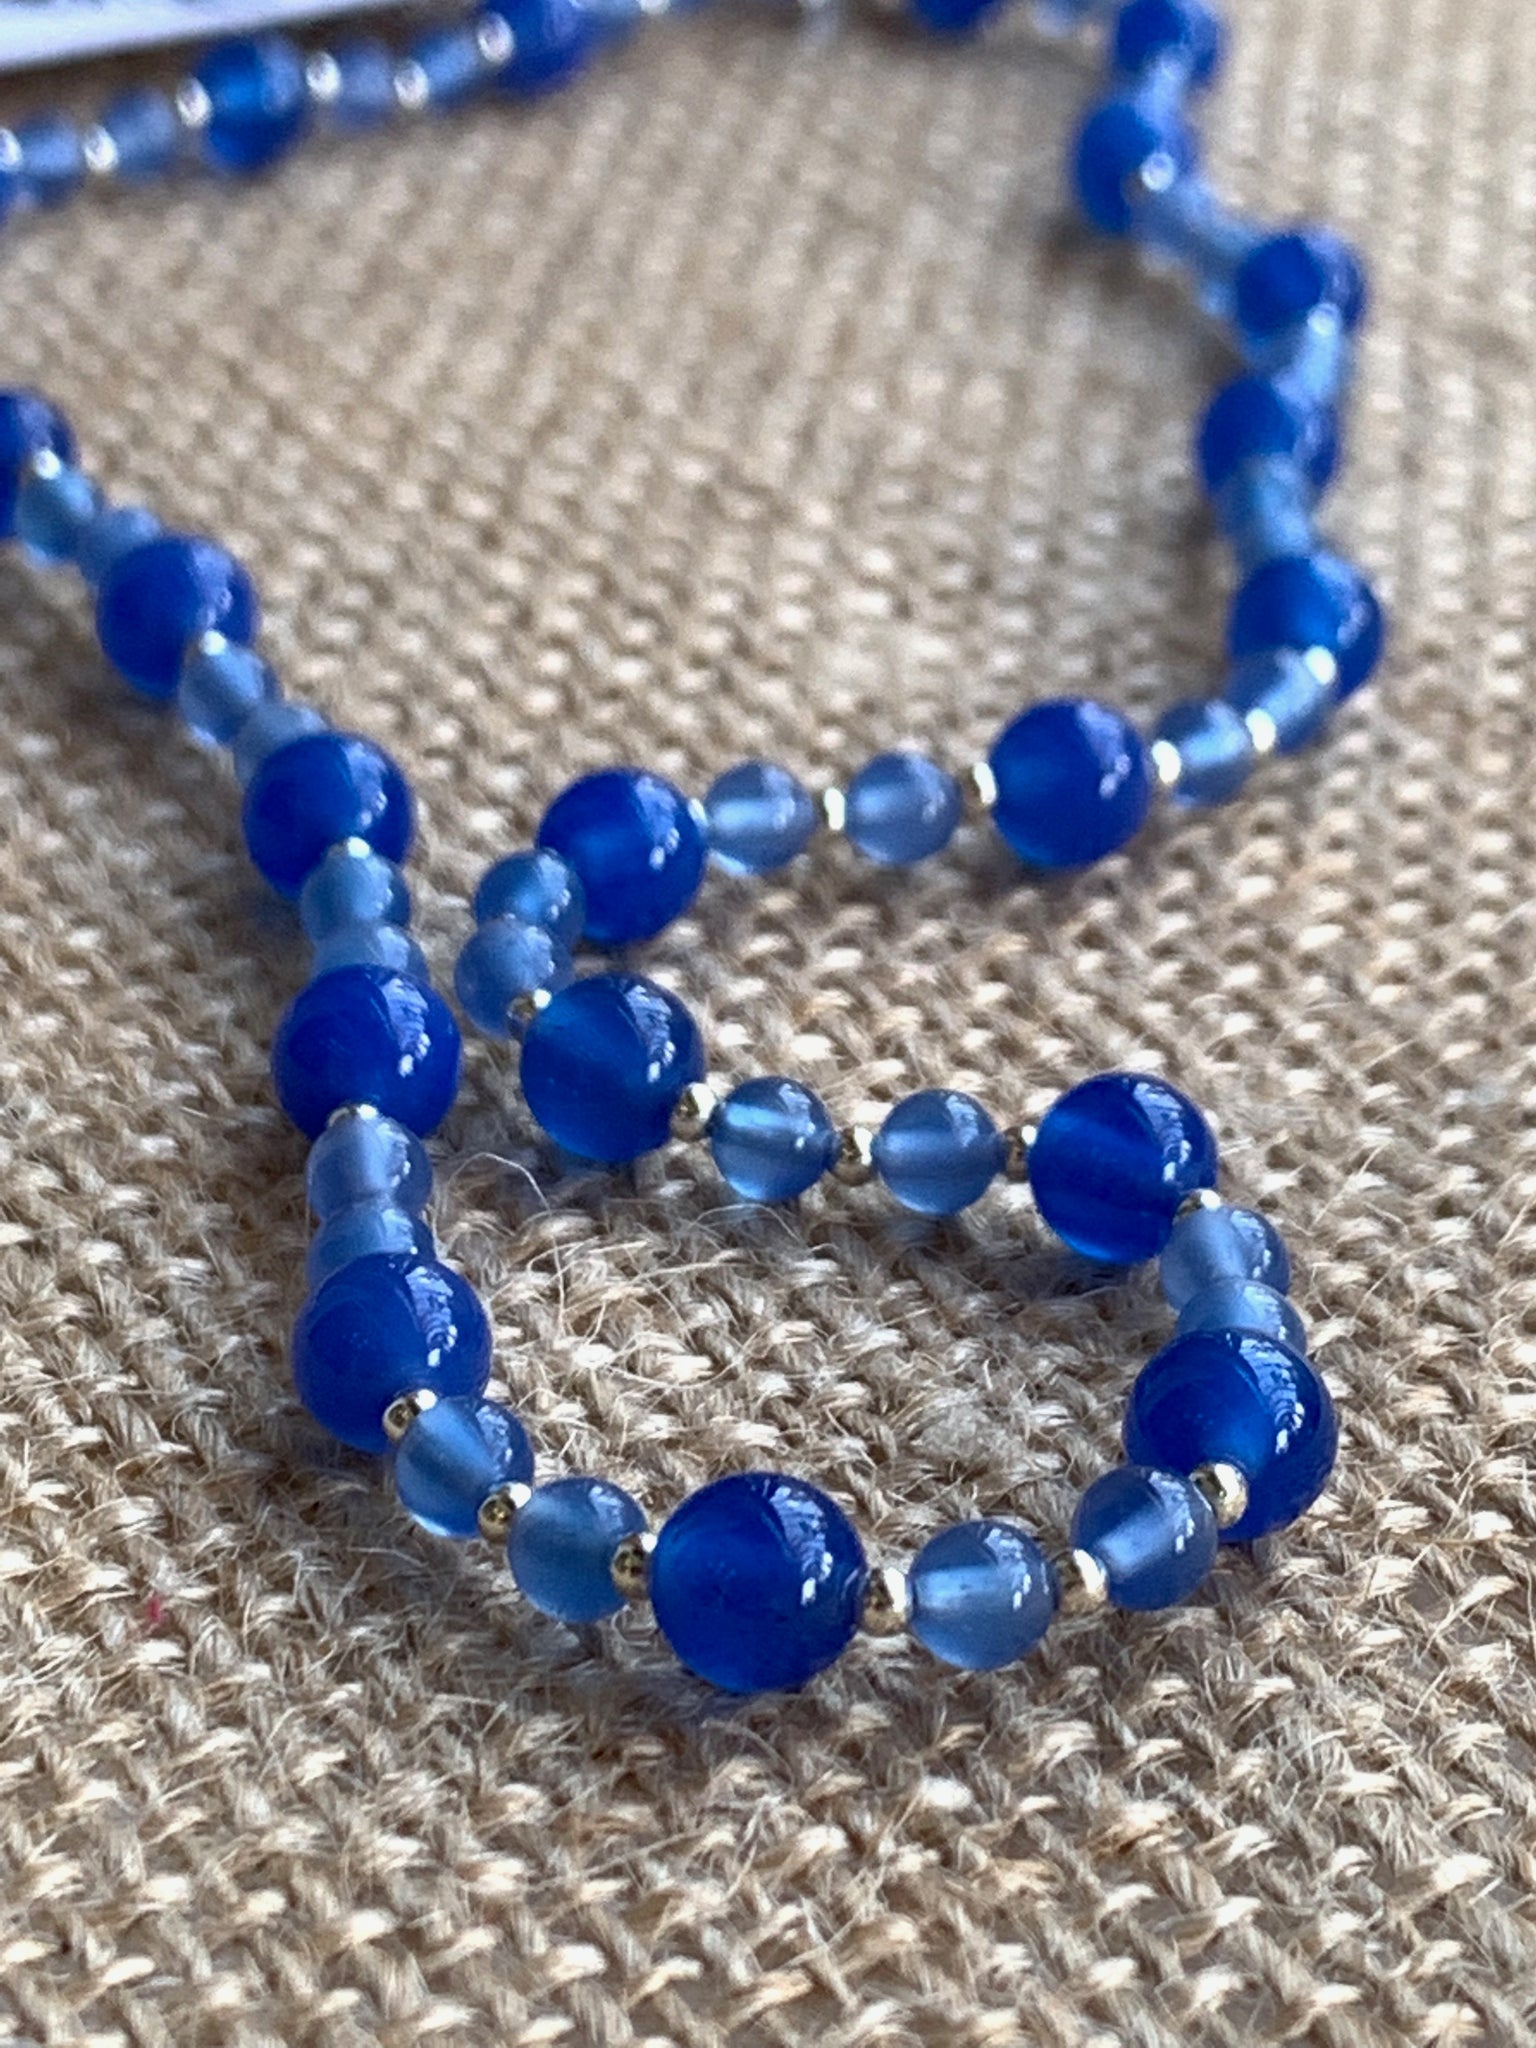 Blue Onyx Gem Stones & Silver Bead on a Sterling Silver Necklace - pixi-daisy